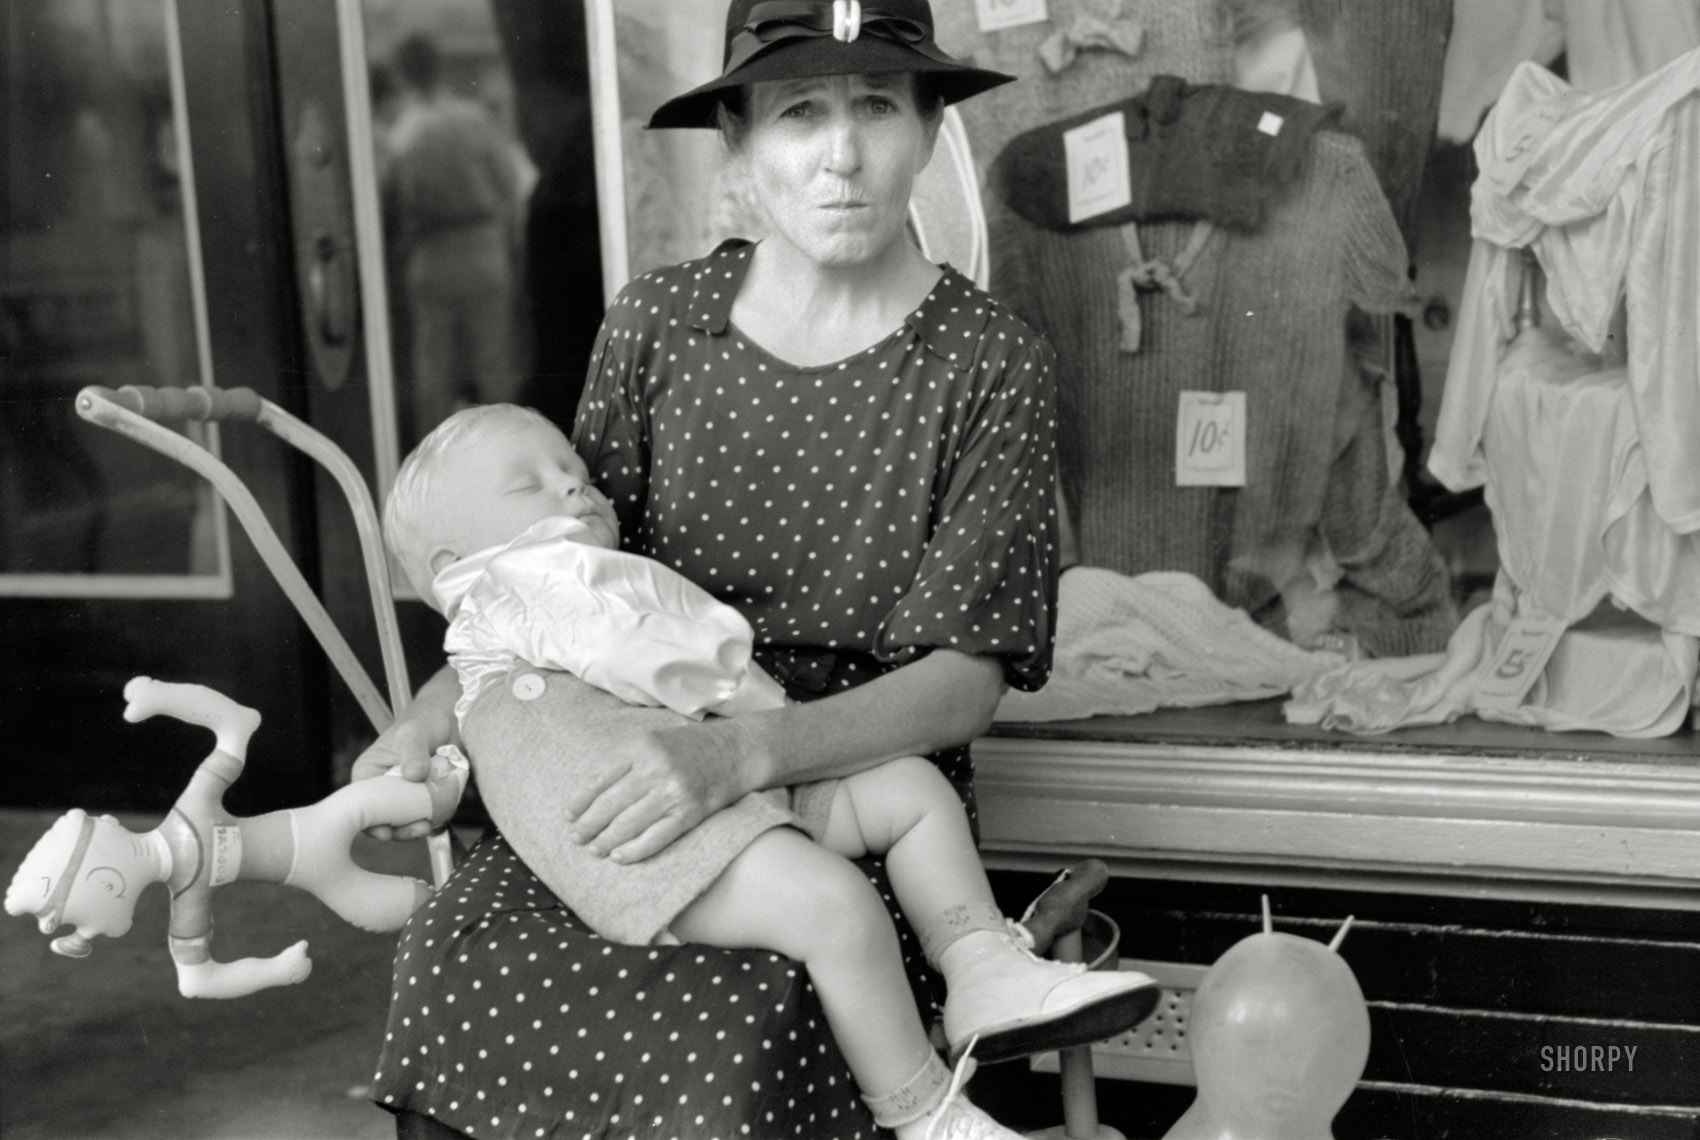 October 1938. Crowley, Louisiana. "Woman with child in front of store during National Rice Festival parade." After the spinach ran out. 35mm nitrate negative by Russell Lee for the Farm Security Administration. View full size.